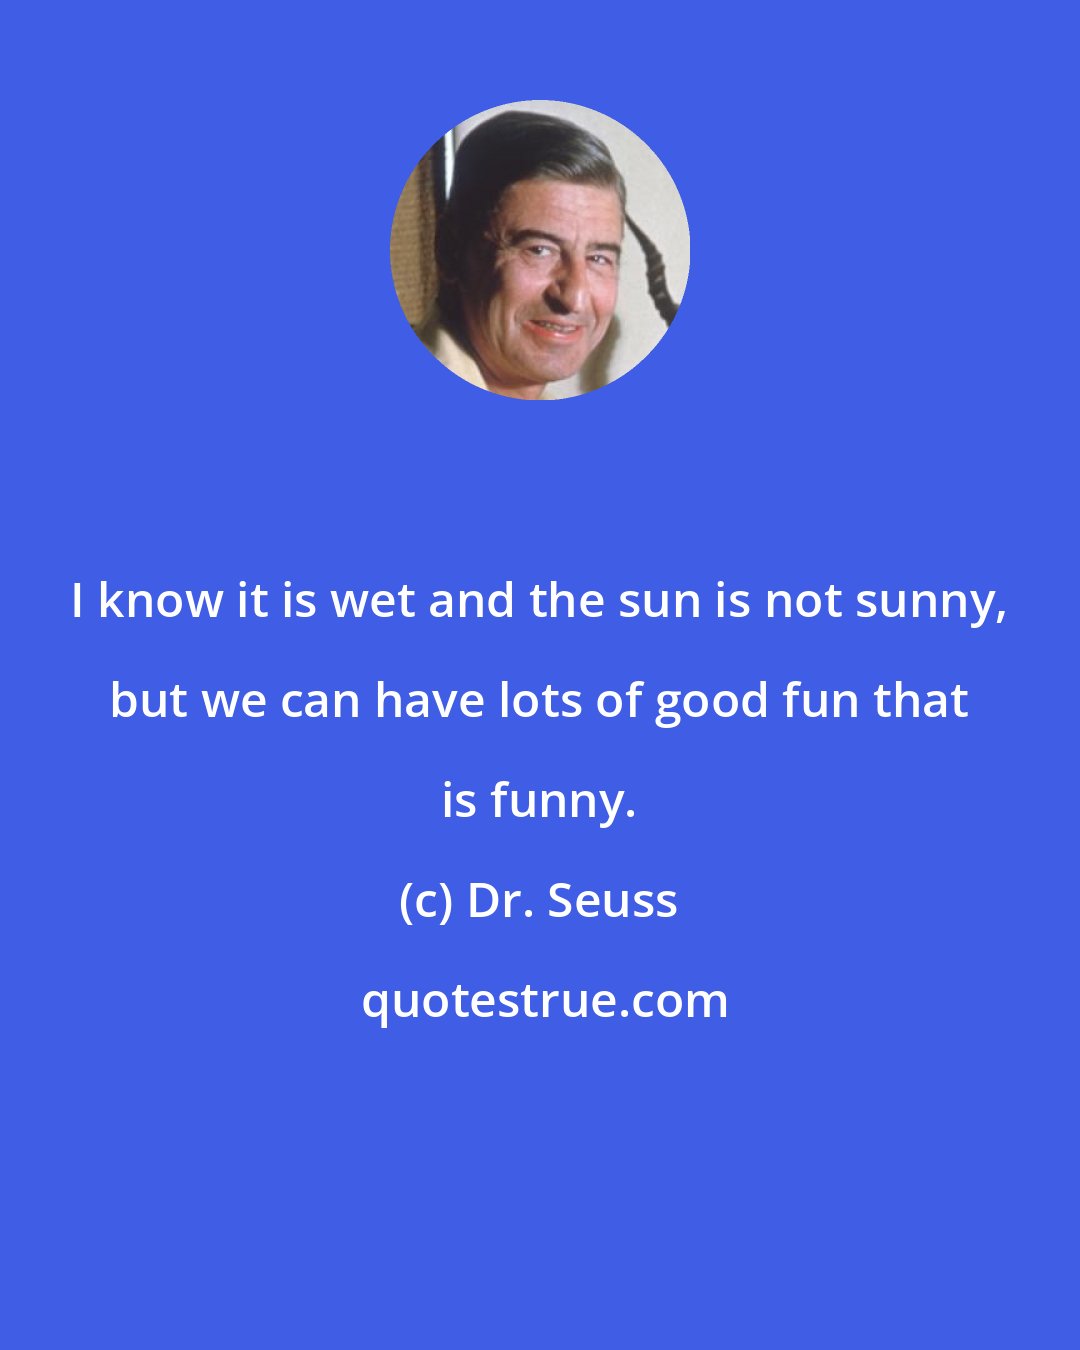 Dr. Seuss: I know it is wet and the sun is not sunny, but we can have lots of good fun that is funny.